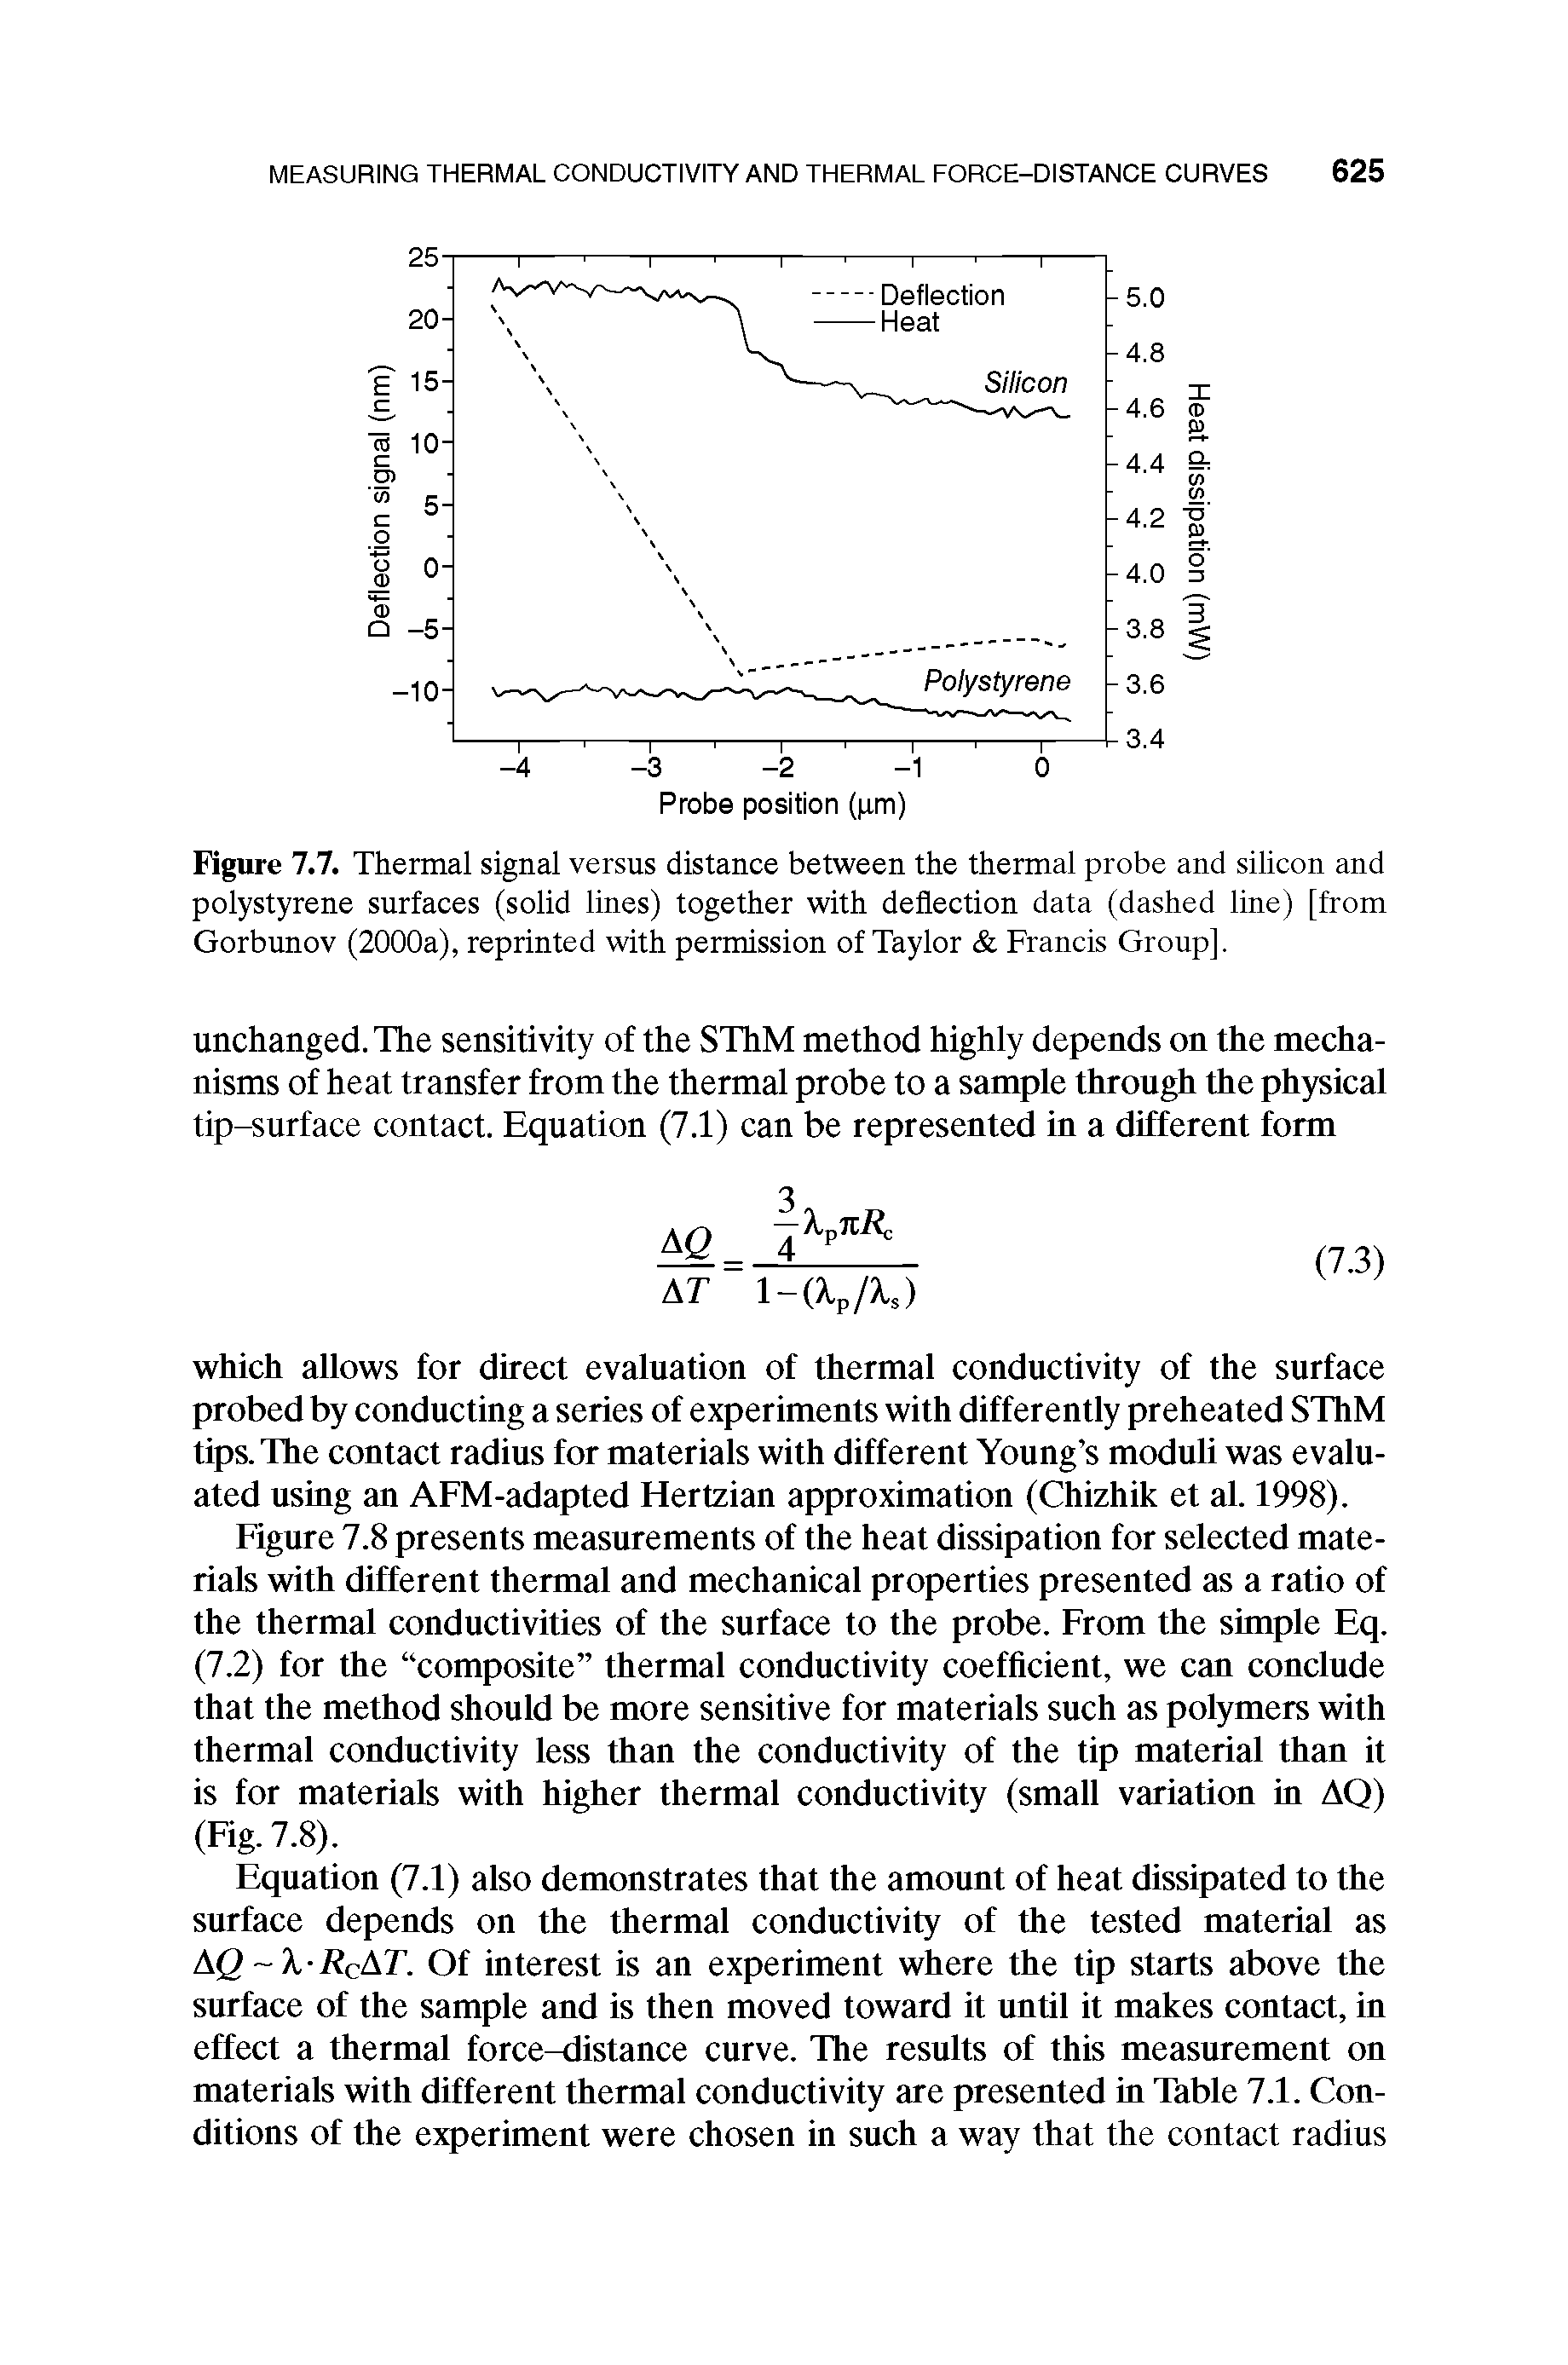 Figure 7.7. Thermal signal versus distance between the thermal probe and silicon and polystyrene surfaces (solid lines) together with deflection data (dashed line) [from Gorbunov (2000a), reprinted with permission of Tayior Francis Group],...